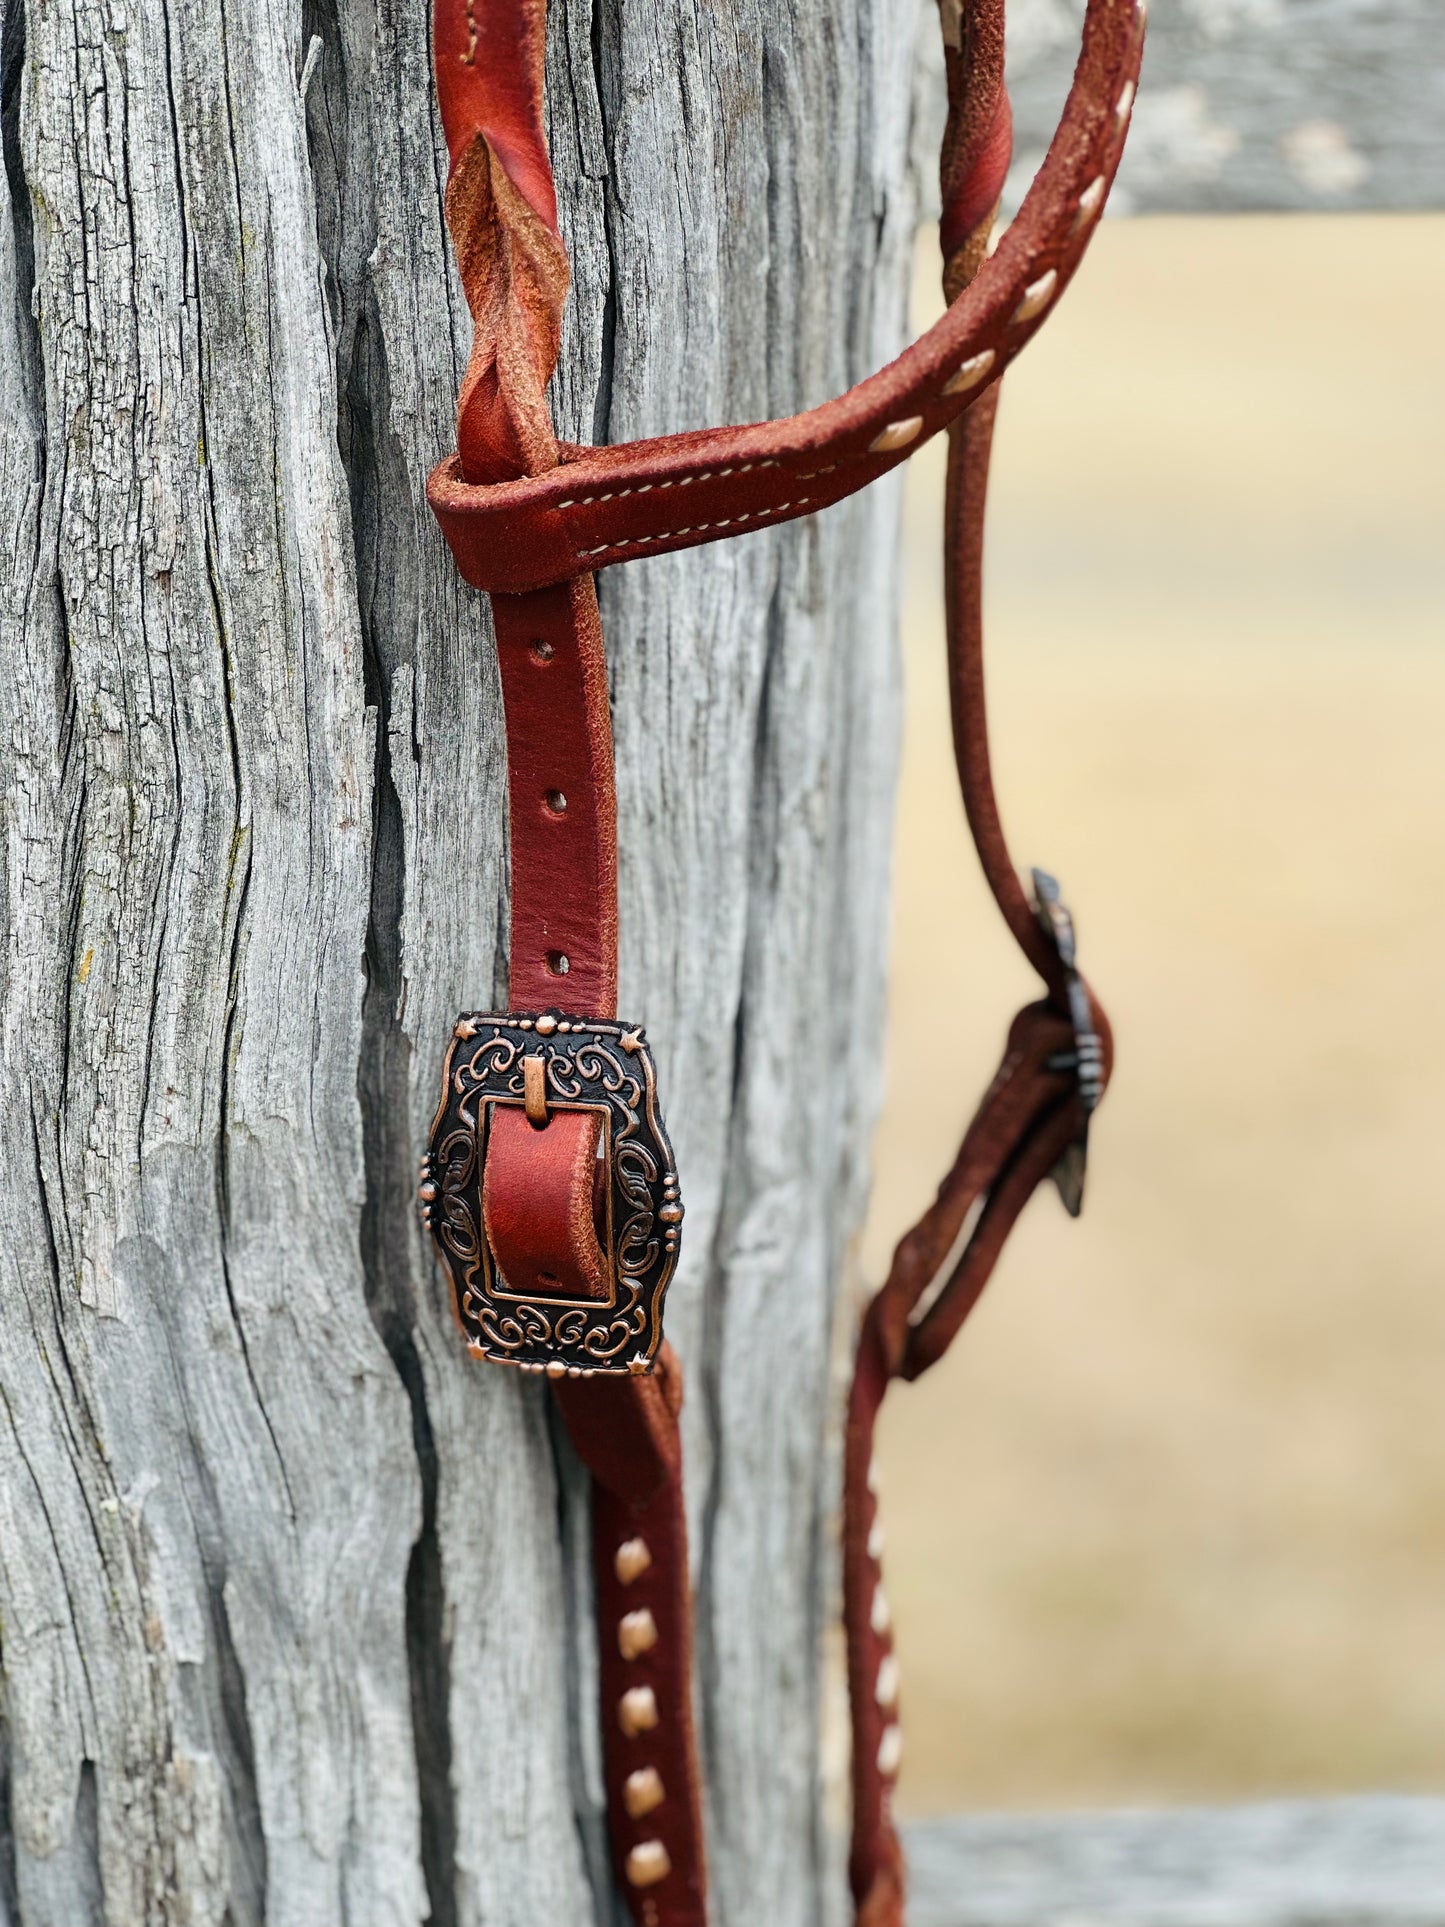 Harness Leather Buckstitch And Bloodknot One Eared Bridle - Metallic Gold